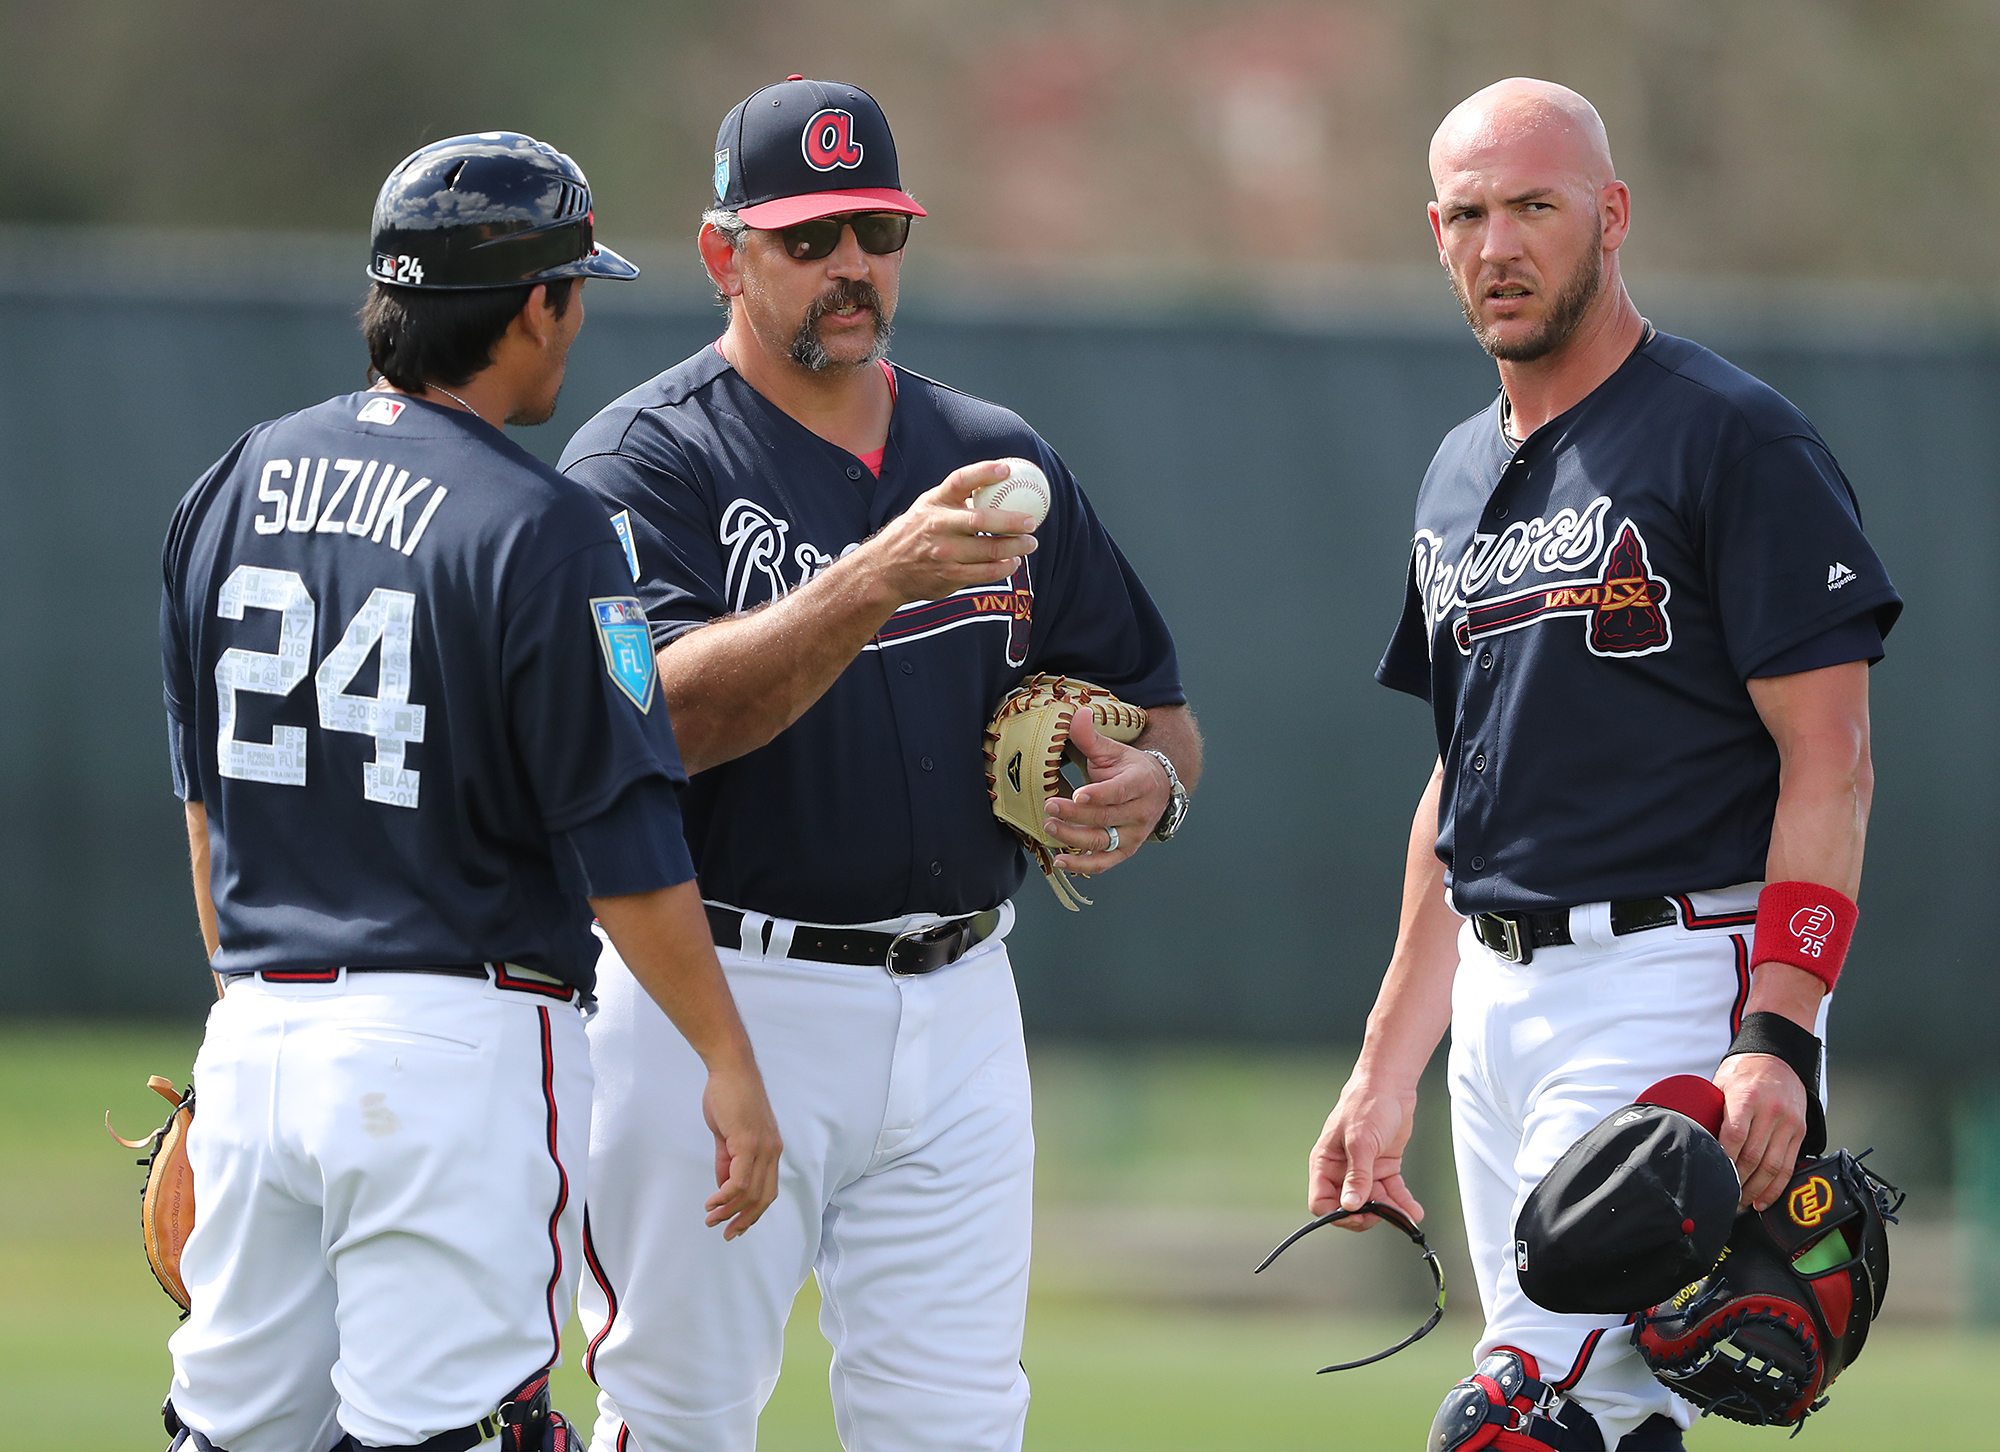 Big Sal' Fasano has been colorful and helpful for Braves catchers